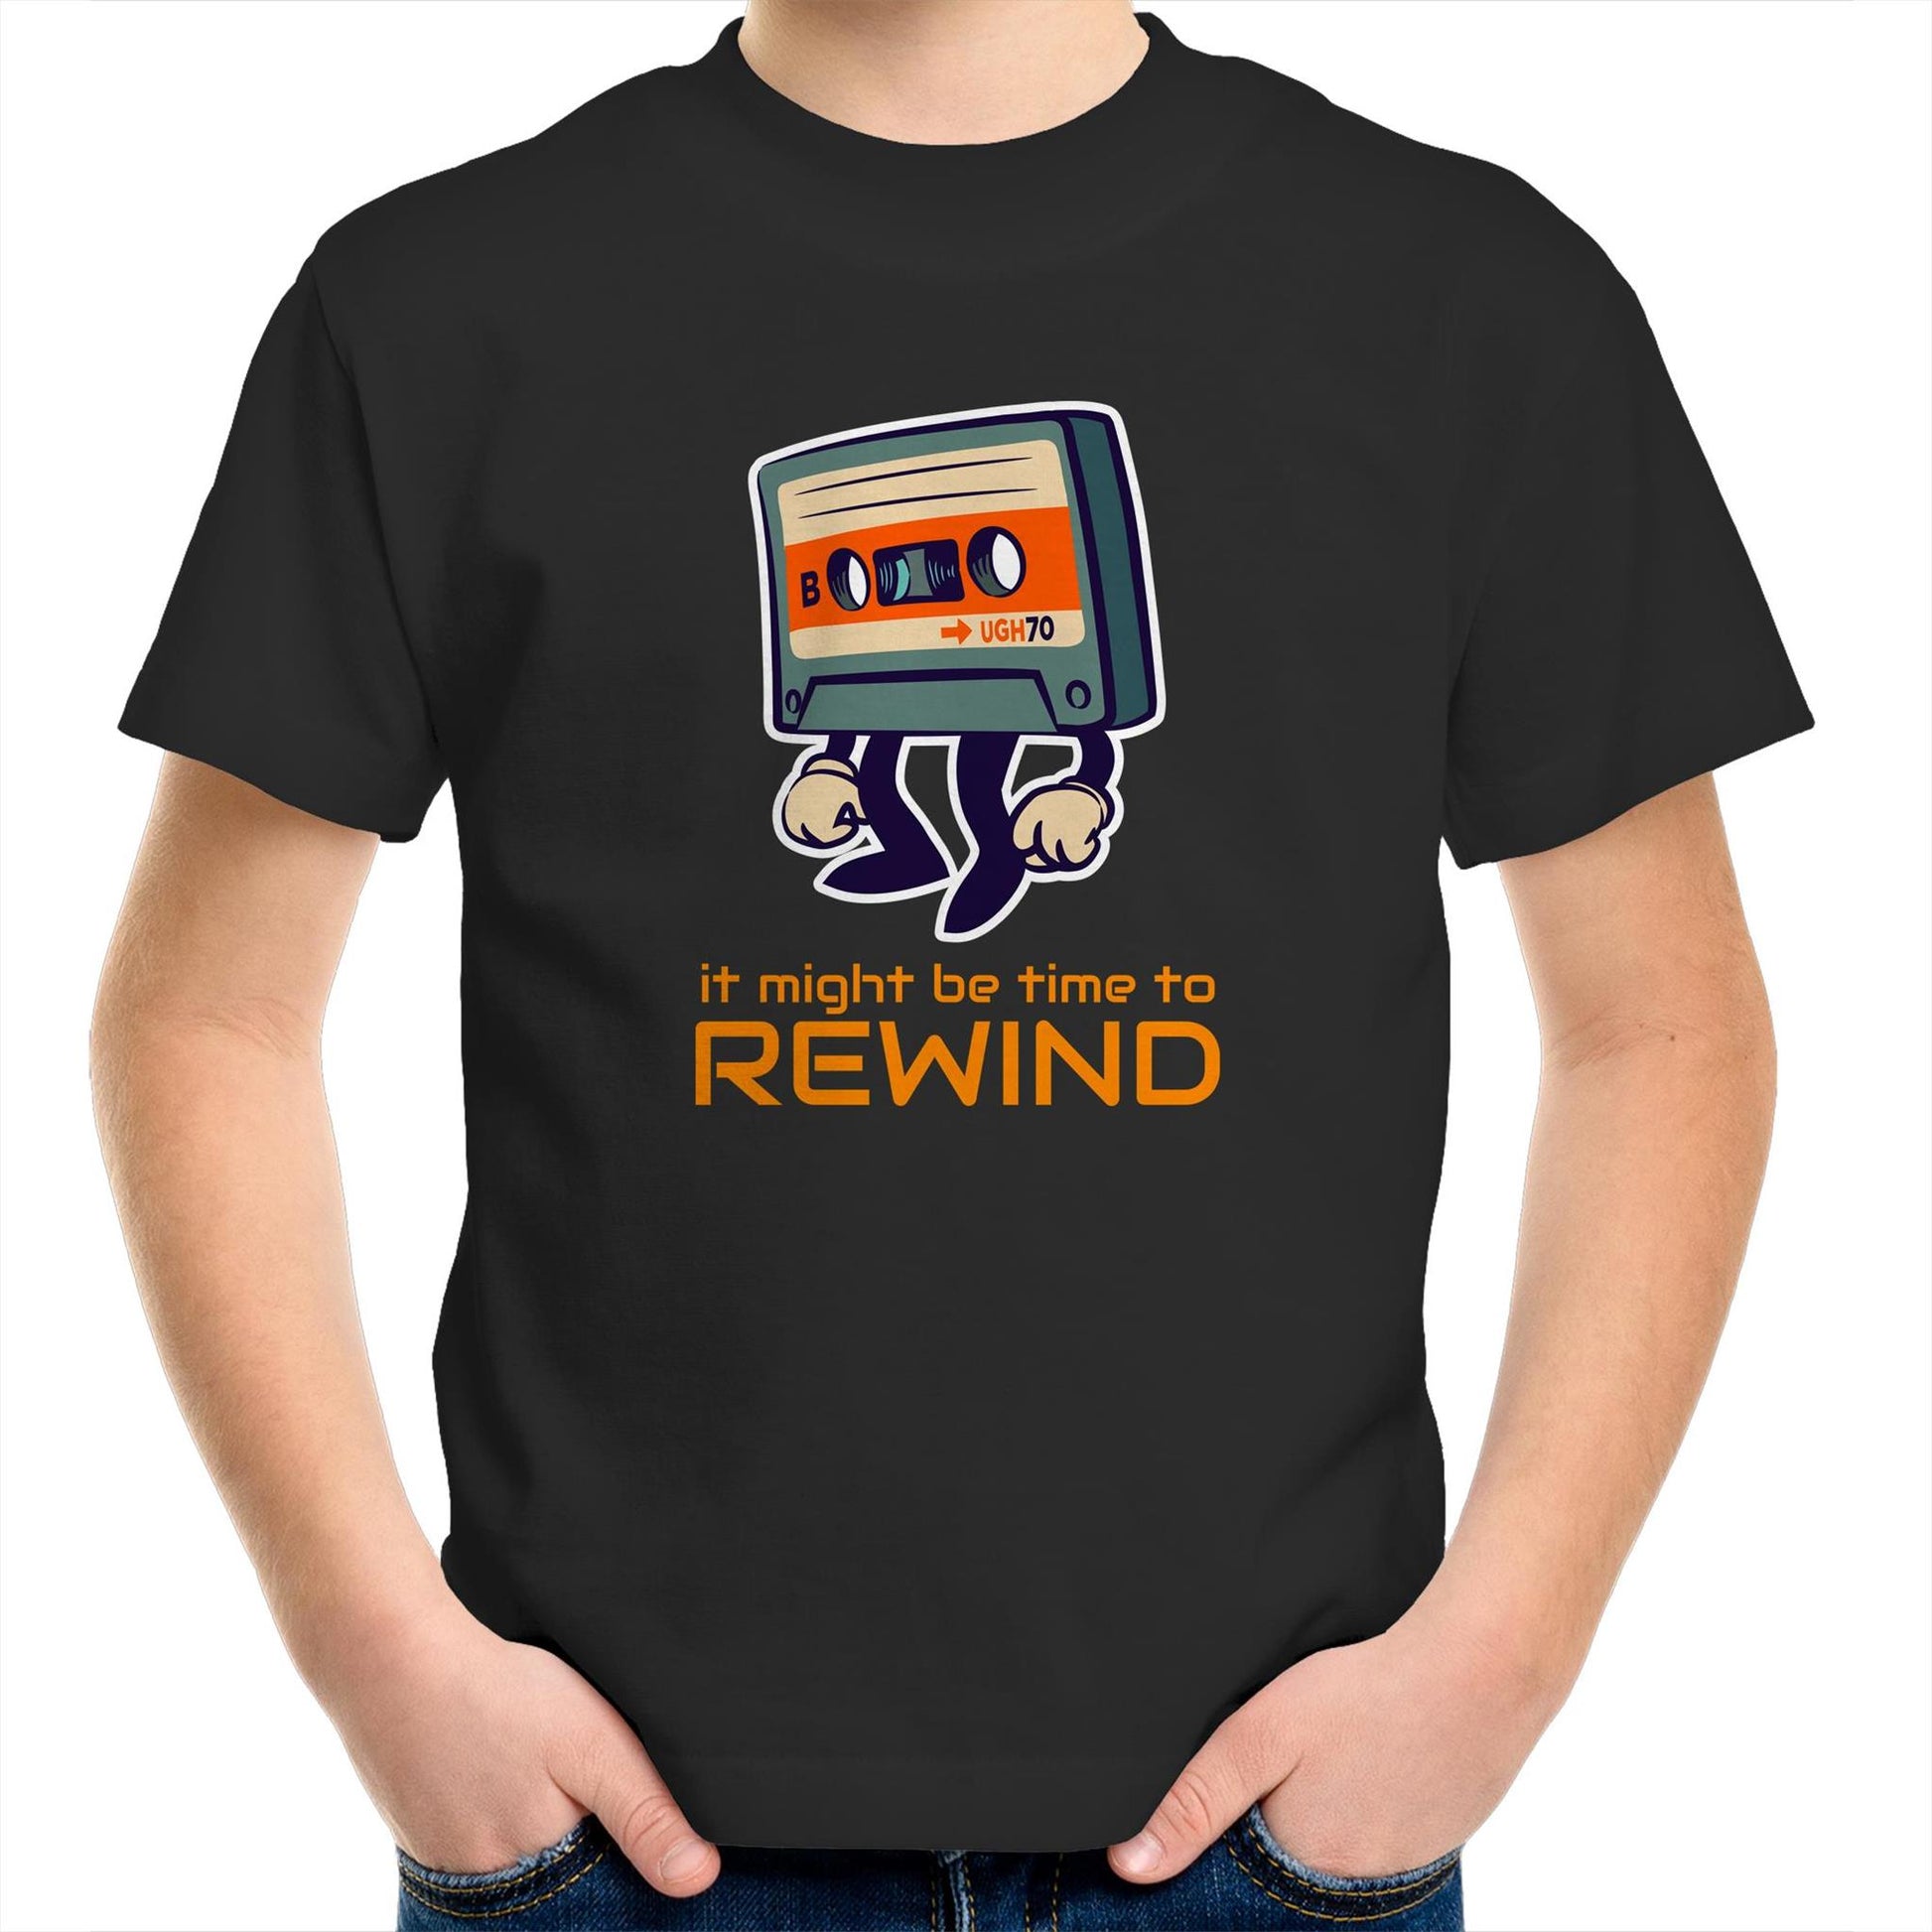 It Might Be Time To Rewind - Kids Youth Crew T-Shirt Black Kids Youth T-shirt Music Retro